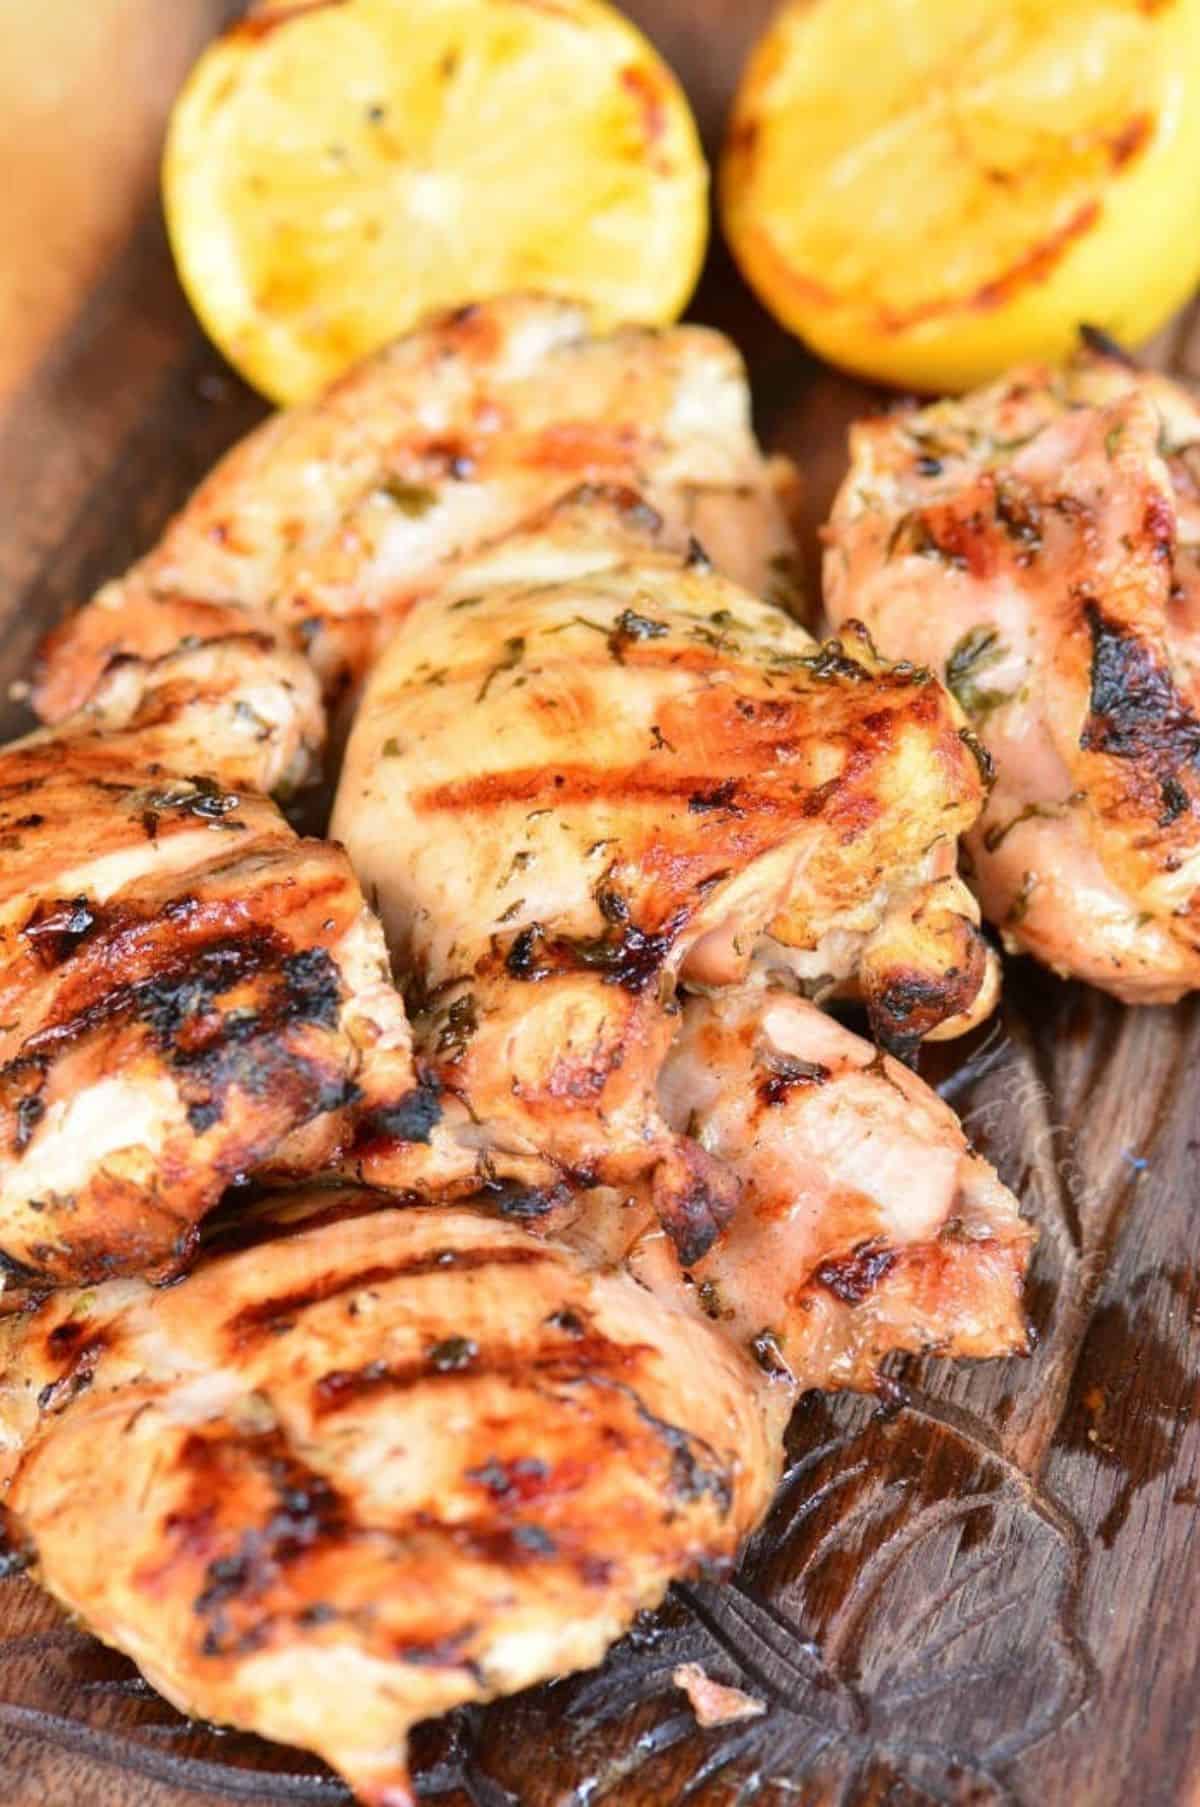 grilled marinated Greek chicken on wooden plate with lemon halves.